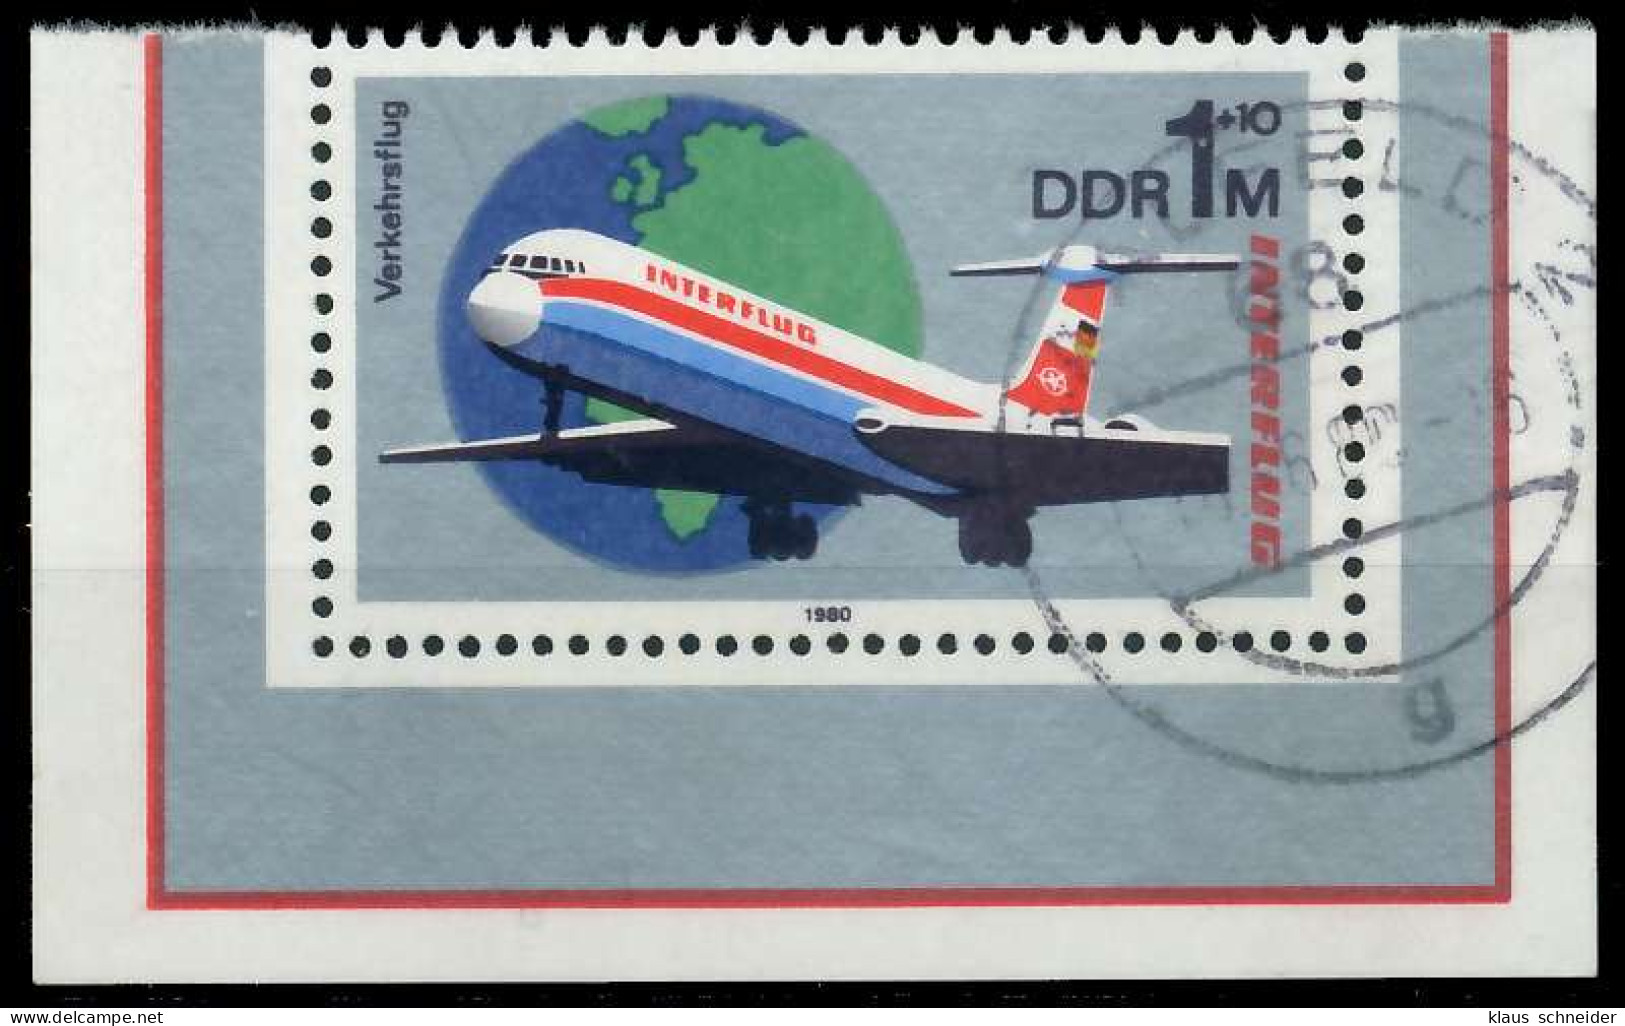 DDR 1980 Nr 2520 Gestempelt X0F1702 - Used Stamps